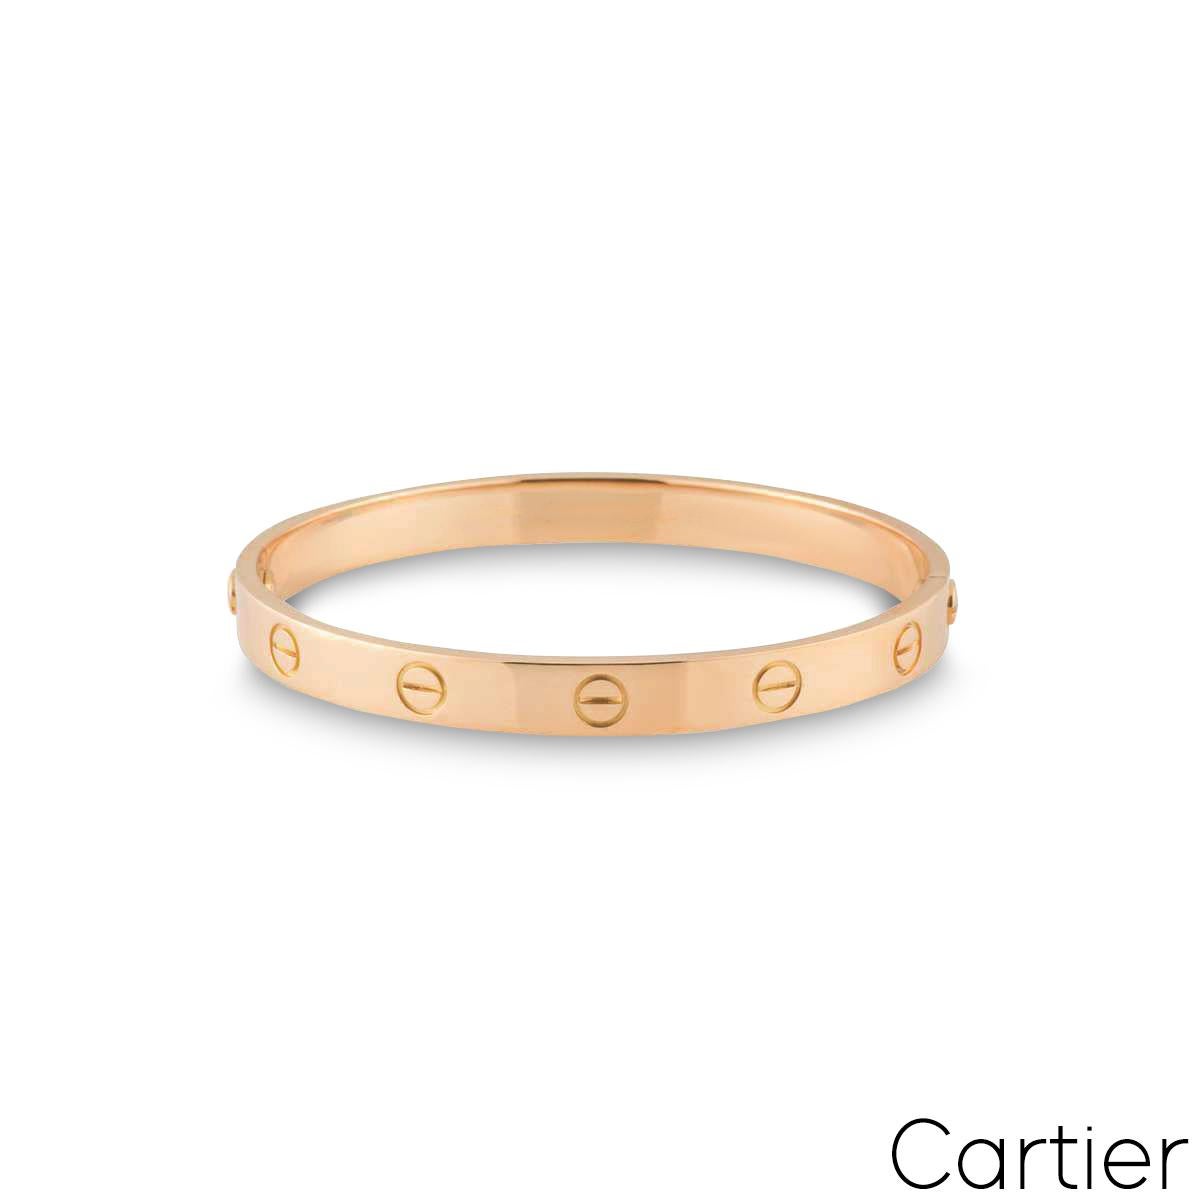 An iconic, 18k rose gold Cartier bracelet from the Love collection. The bracelet comprises of the iconic screw motifs around the outer edge. A size 20, featuring the old style screw system, this bracelet has a gross weight of 35.50 grams.

Comes